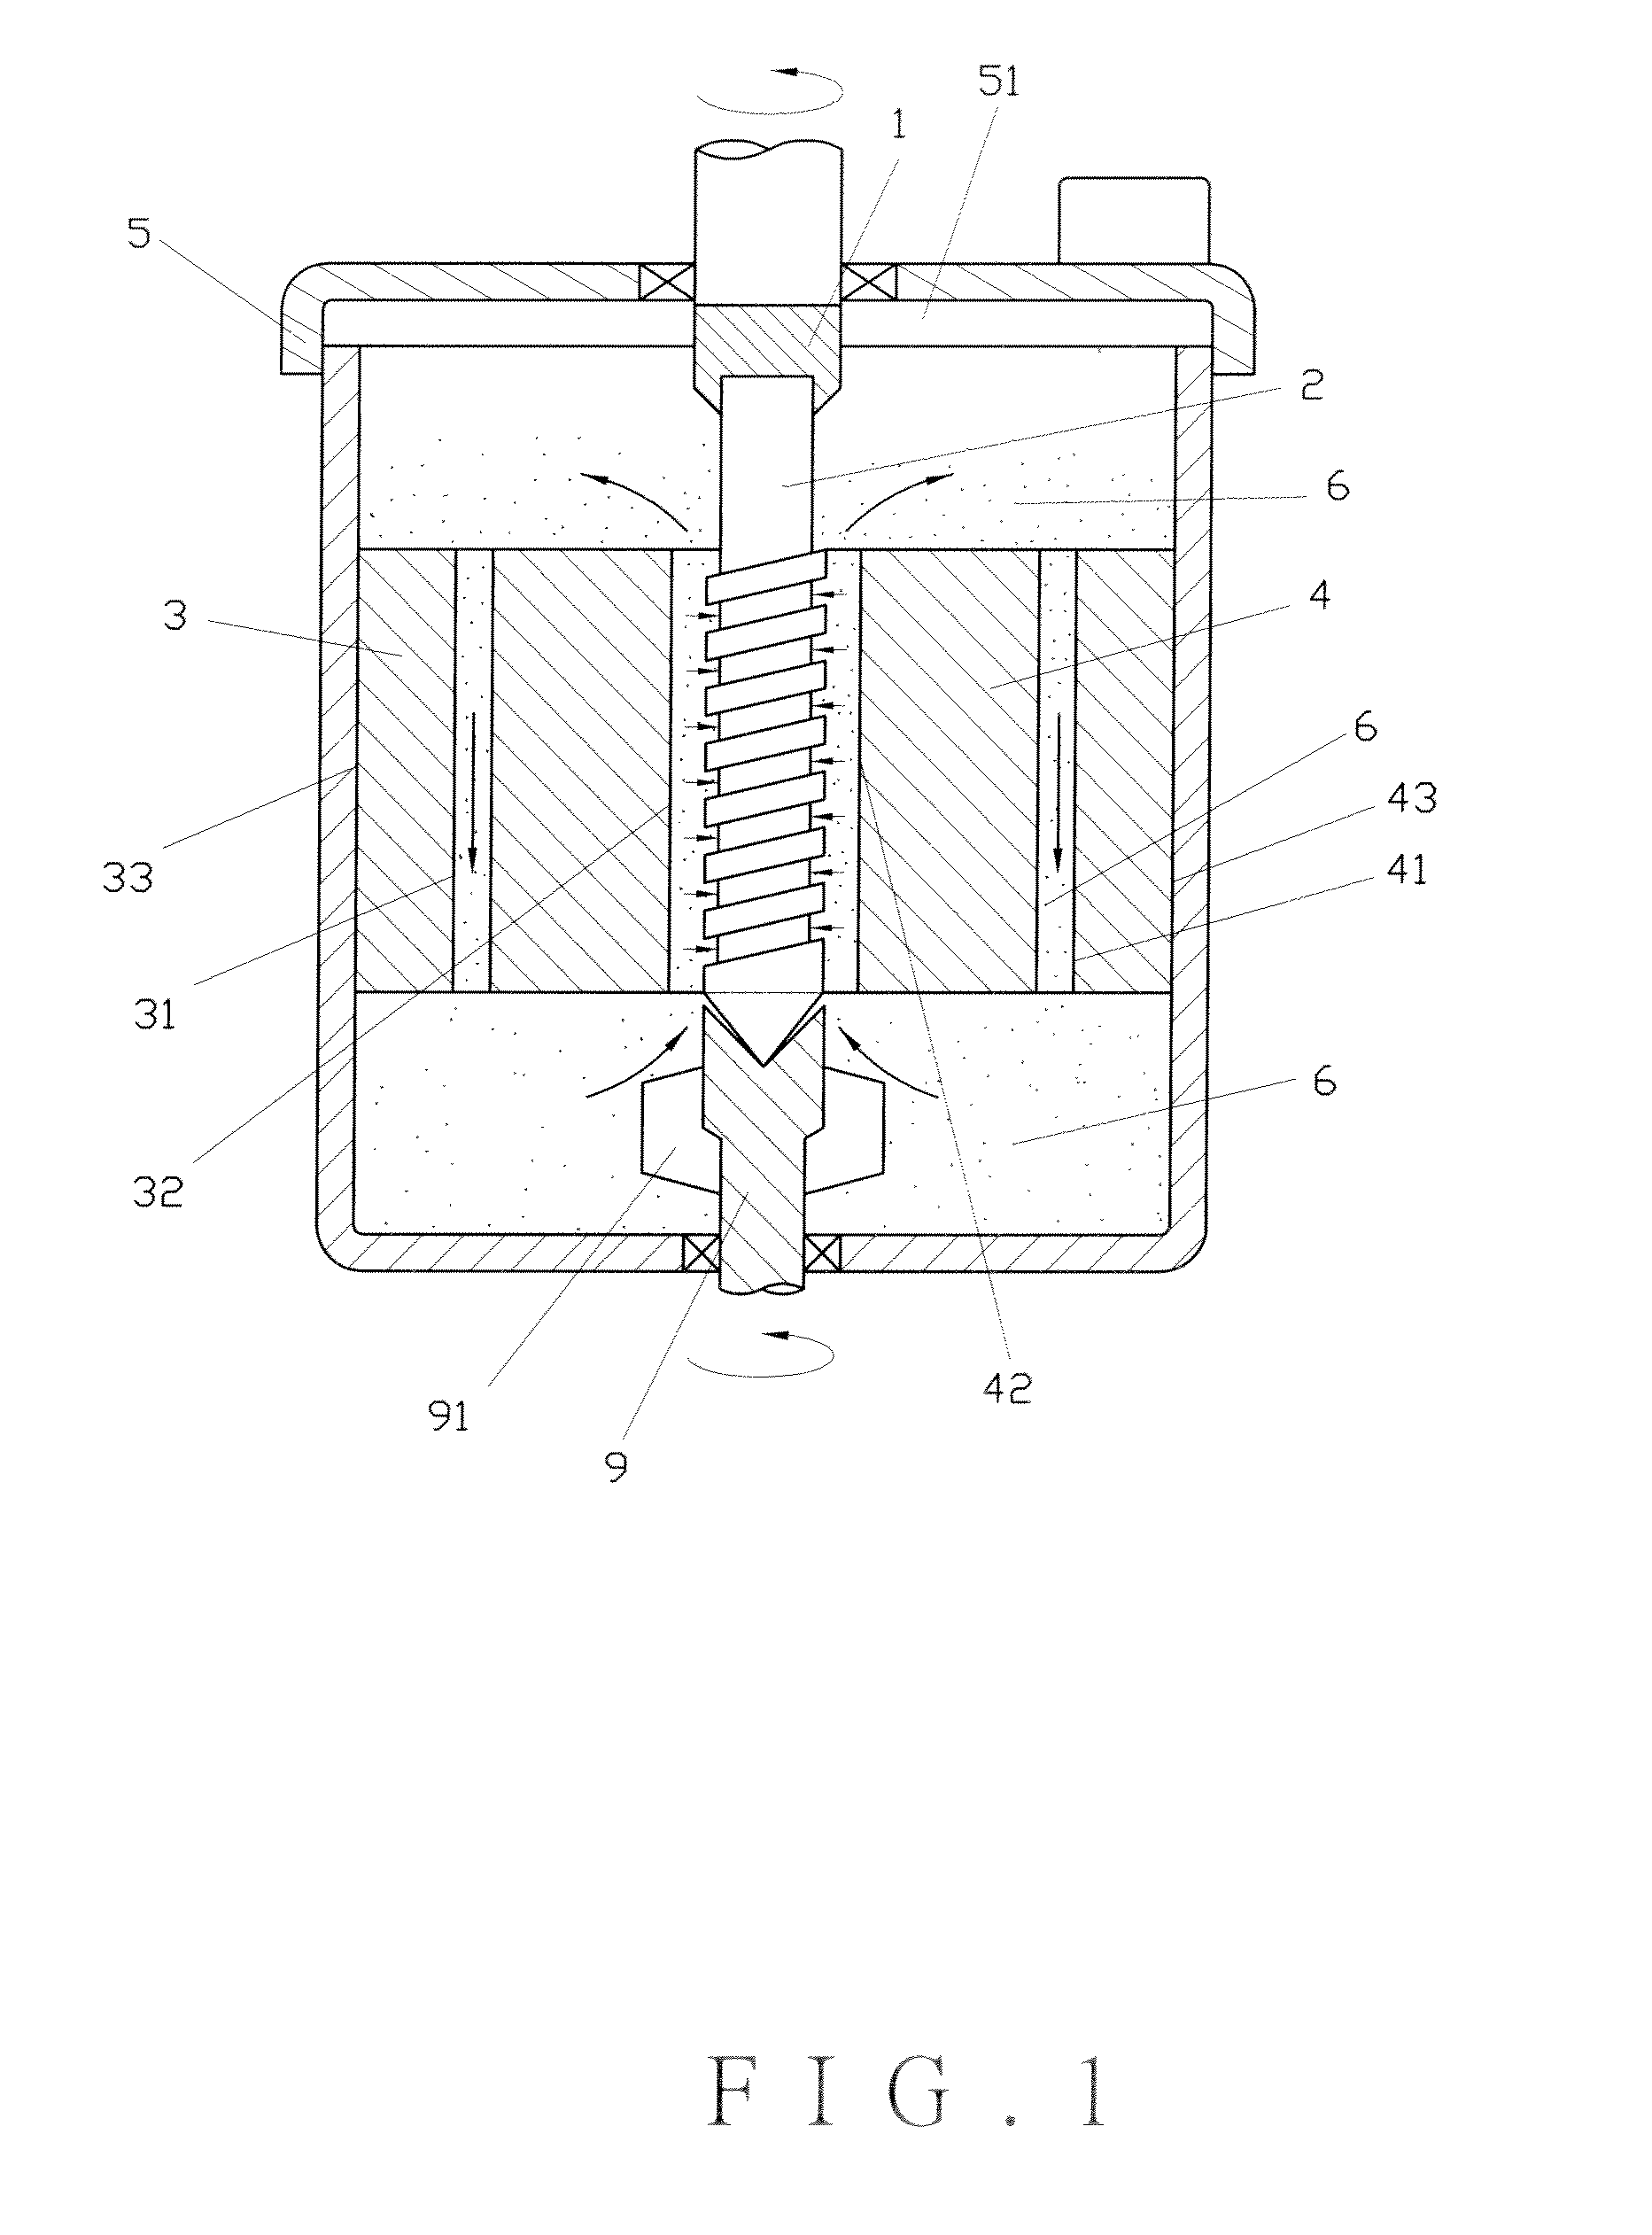 Apparatus and method for spiral polishing with electromagnetic abrasive